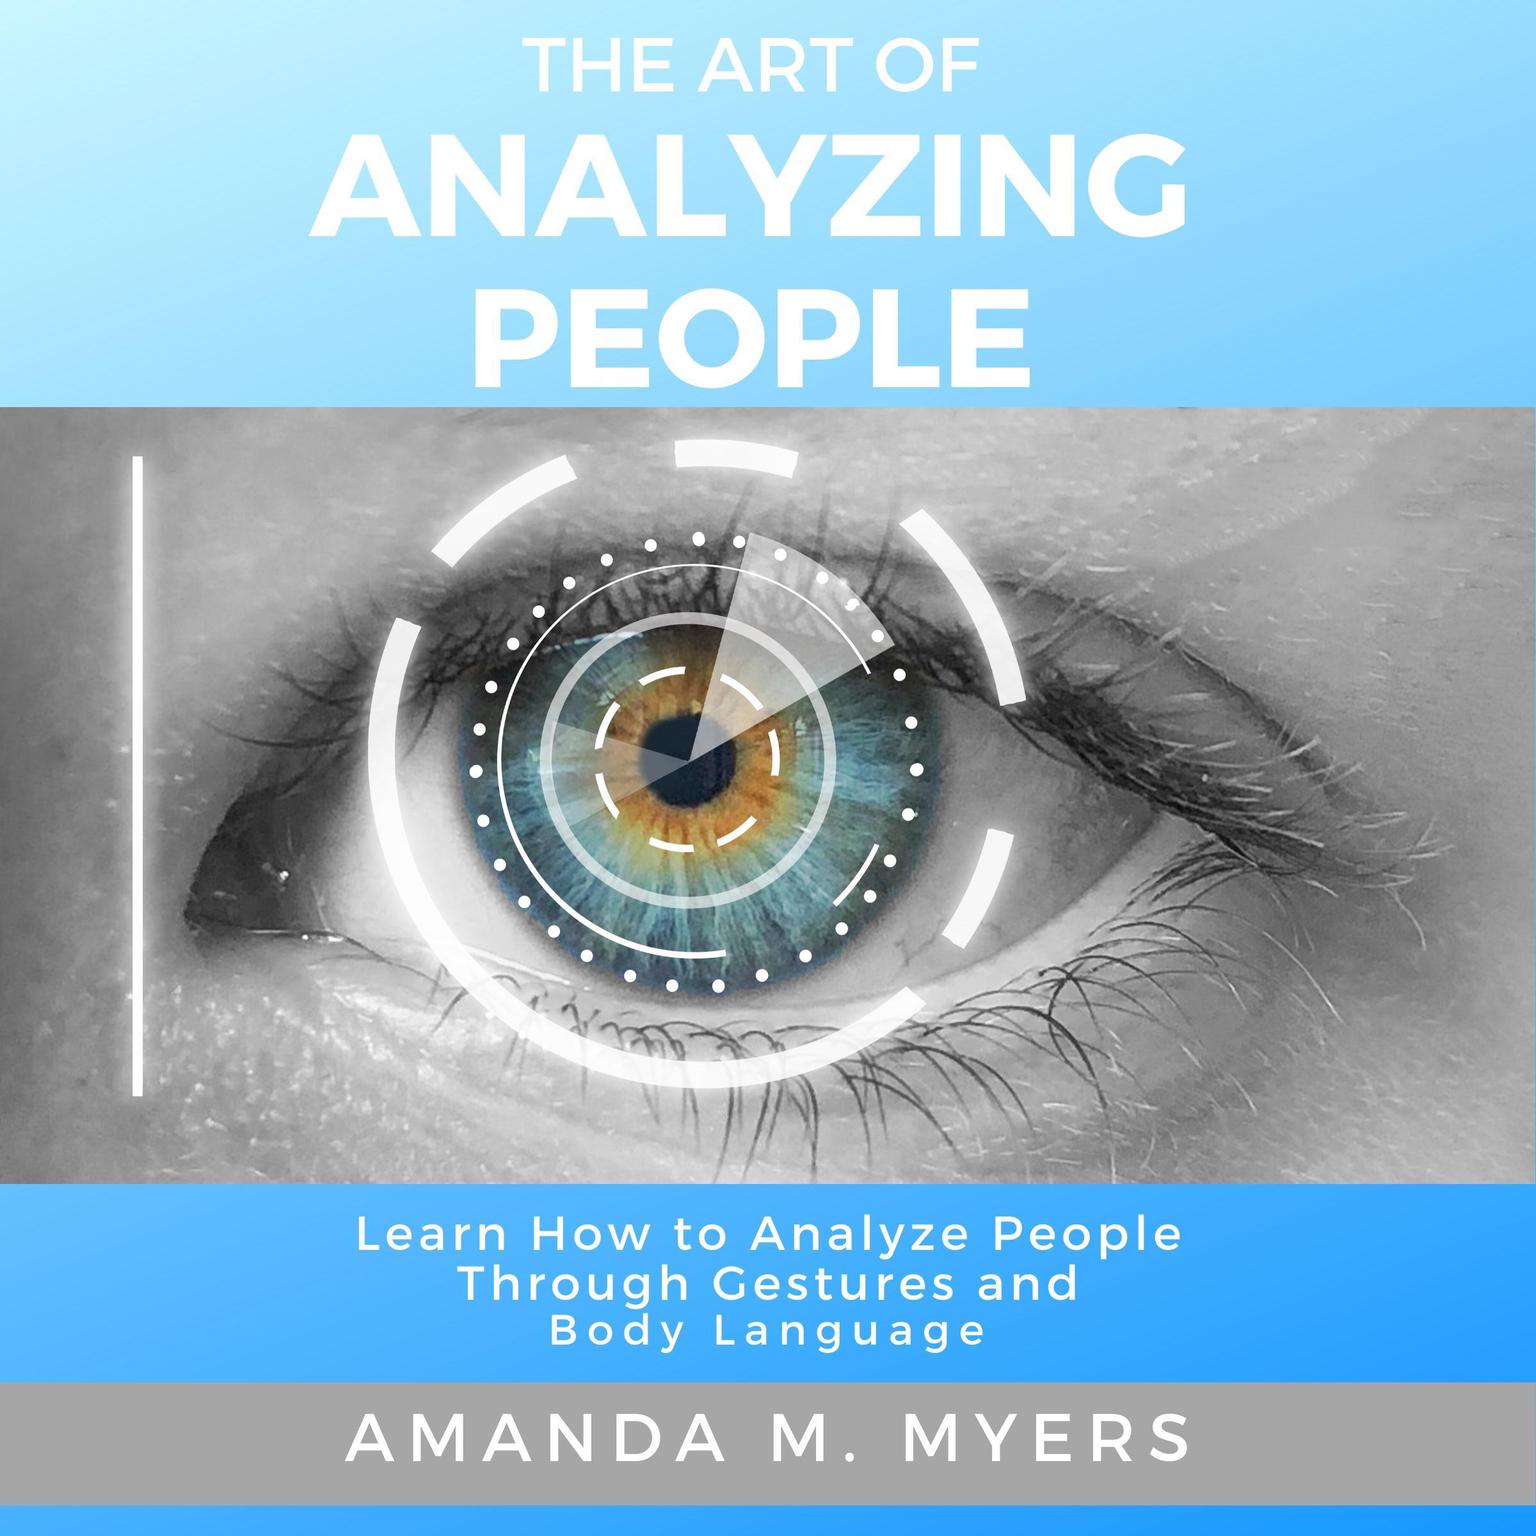 The Art of Analyzing People: Learn How to Analyze People Through Gestures and Body Language Audiobook, by Amanda M. Myers